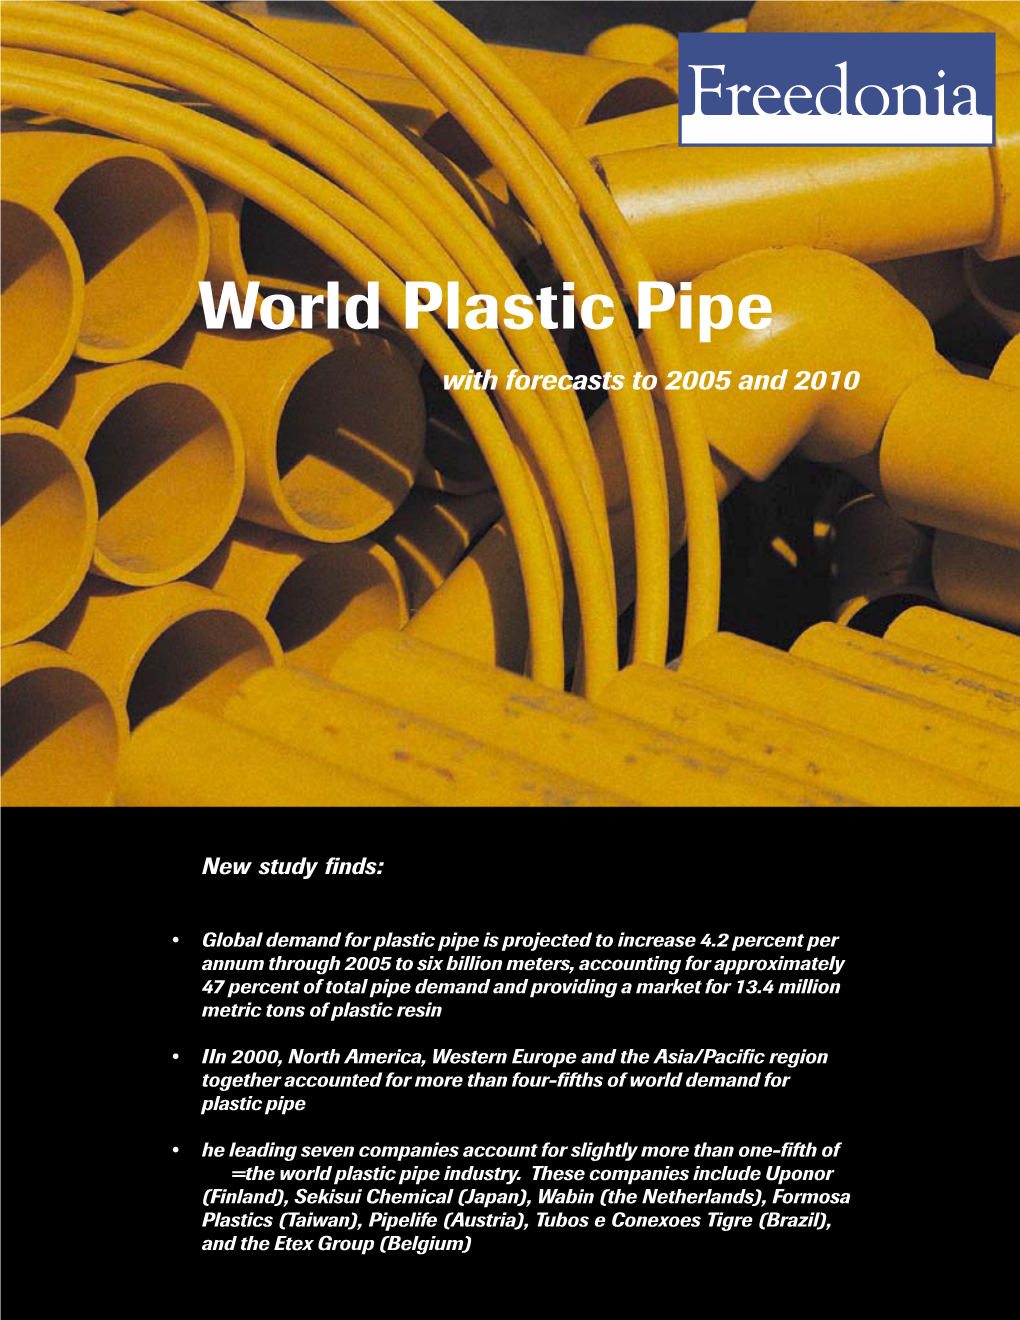 World Plastic Pipe with Forecasts to 2005 and 2010